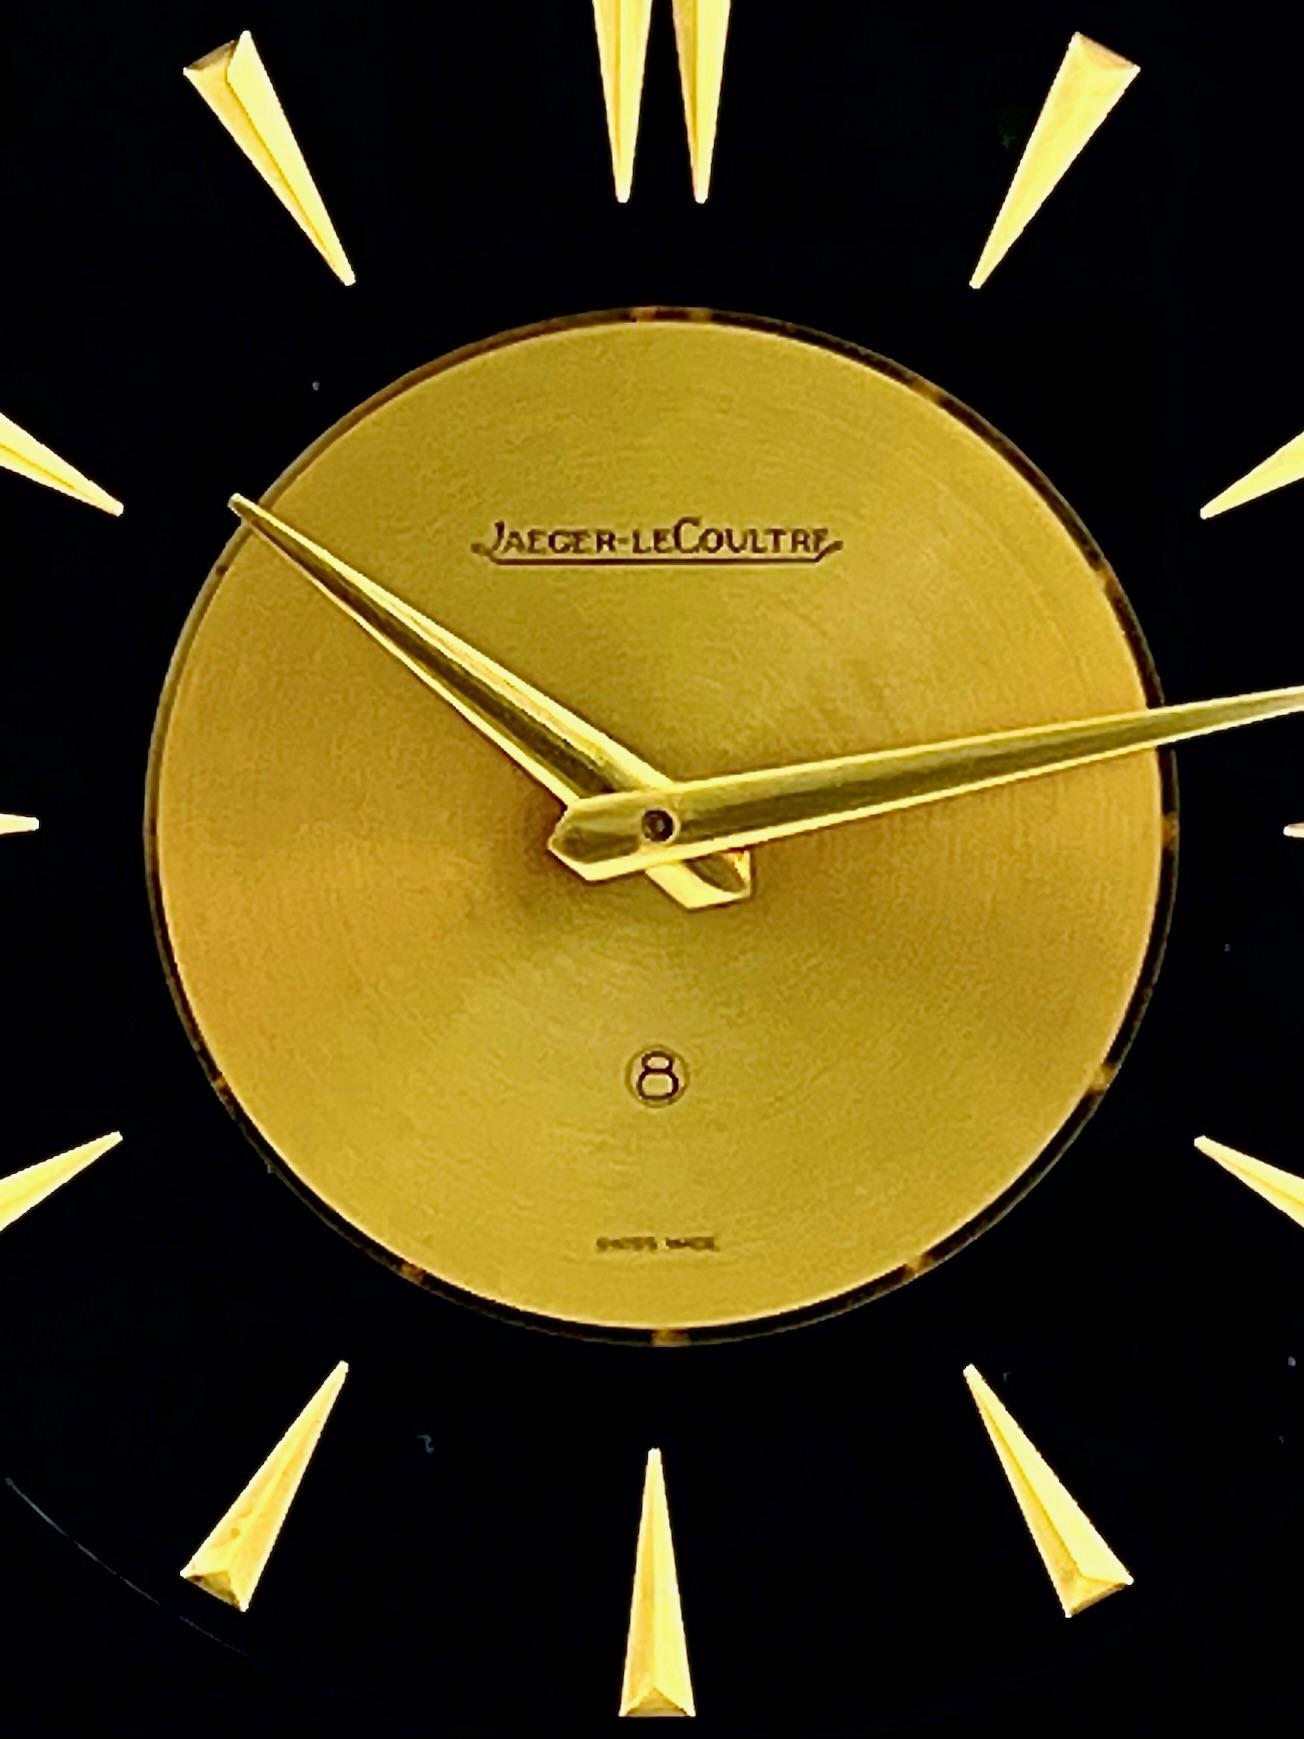 Beautiful Jaeger LeCoultre mid century Marina eight day clock with a detailed naturalistic design.

With a polished gilt brass and lucite case with a black background, this clock is beautifully decorated with a scene from nature showing a